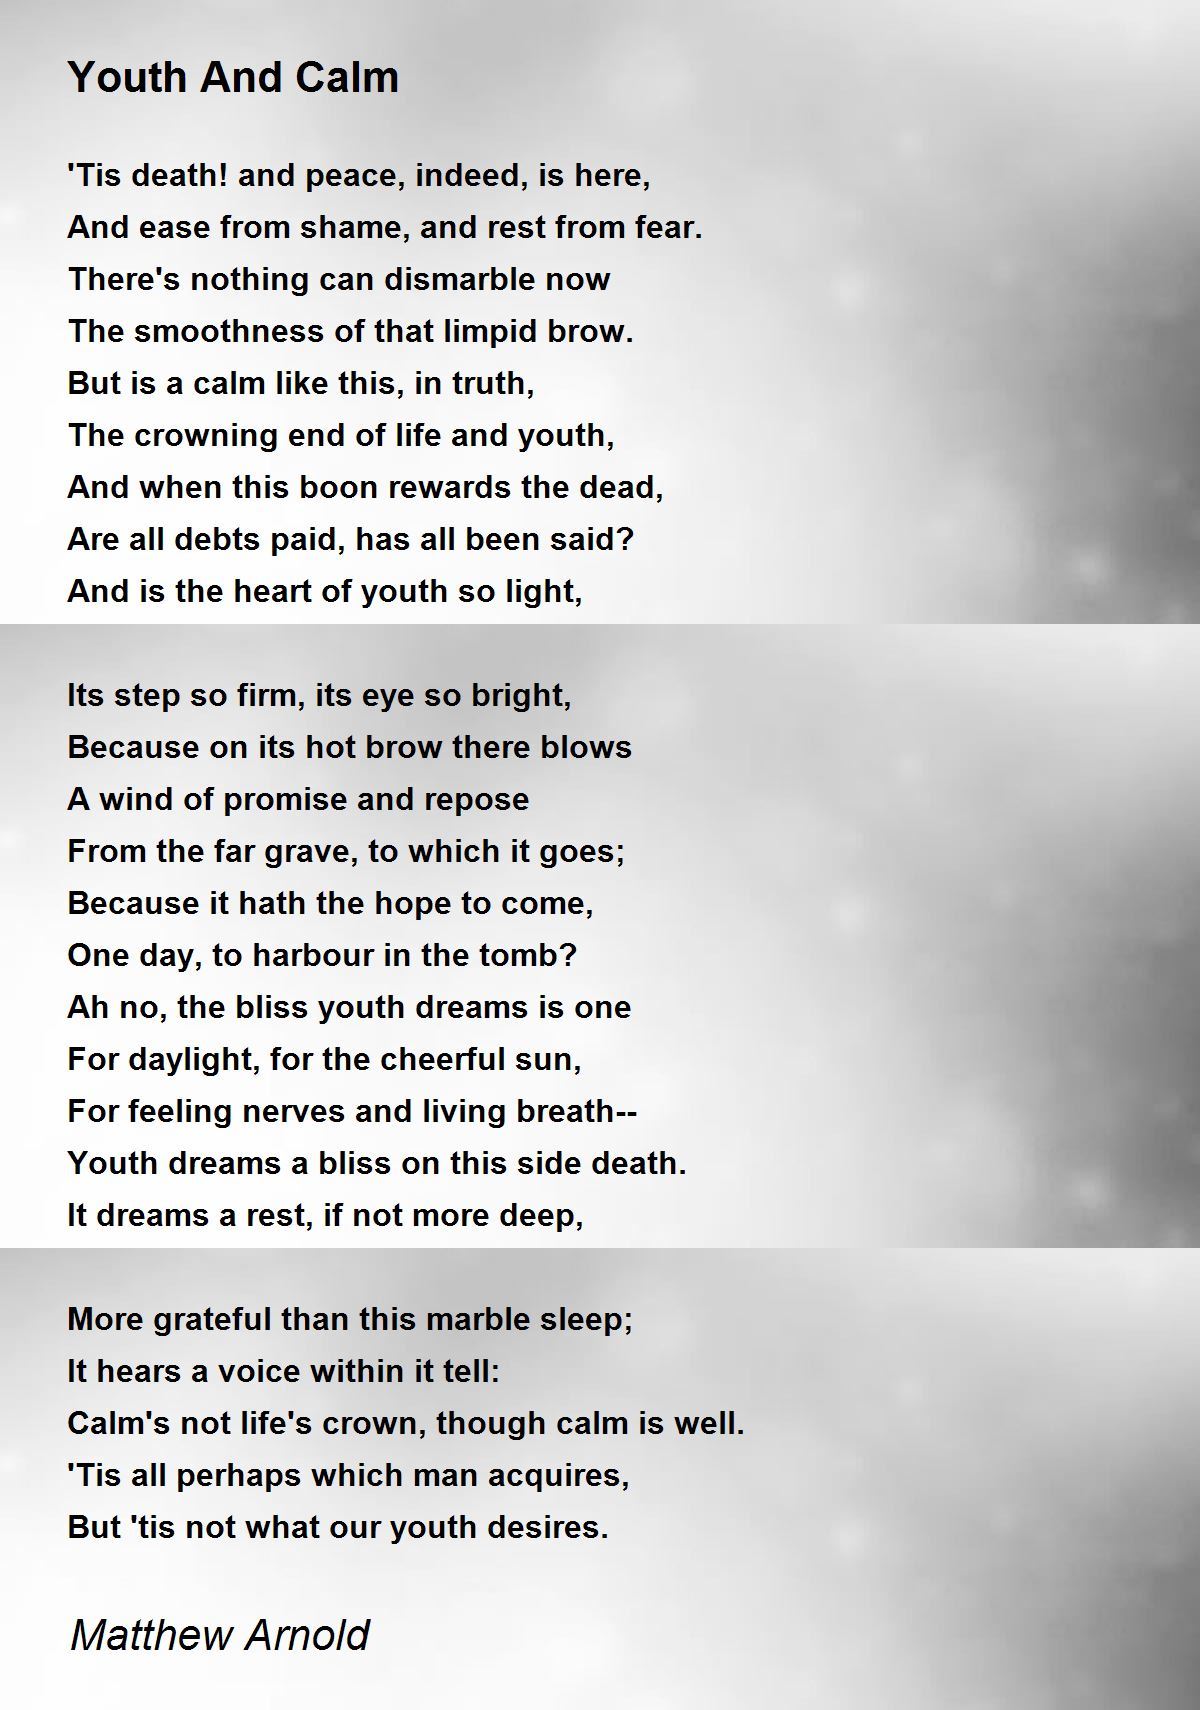 Youth And Calm Poem by Matthew Arnold - Poem Hunter